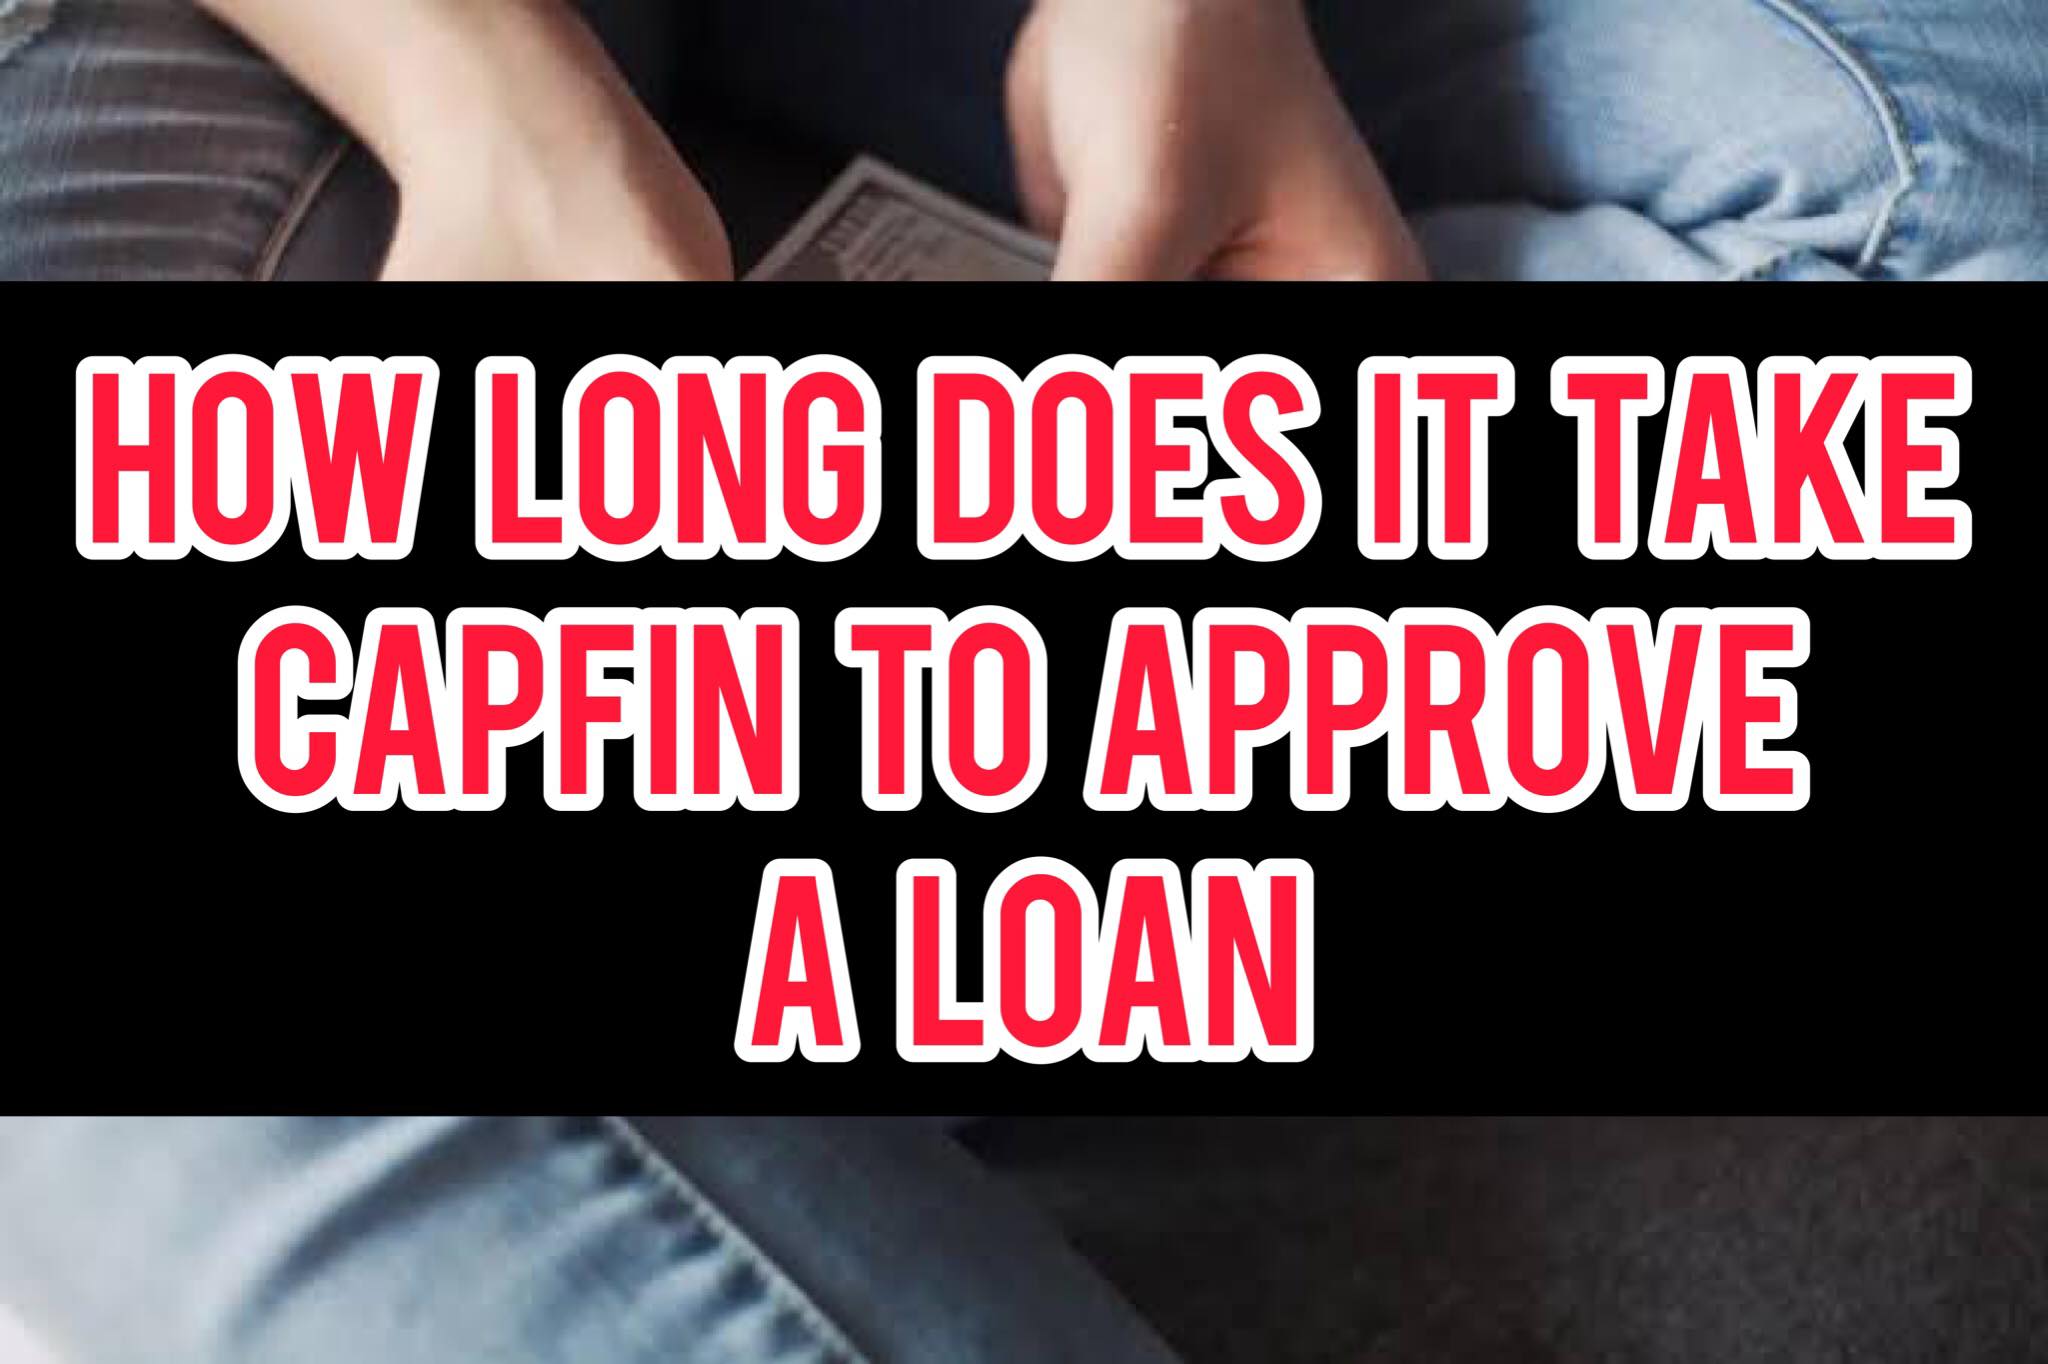 How Long Does Capfin Take To Approve A Loan